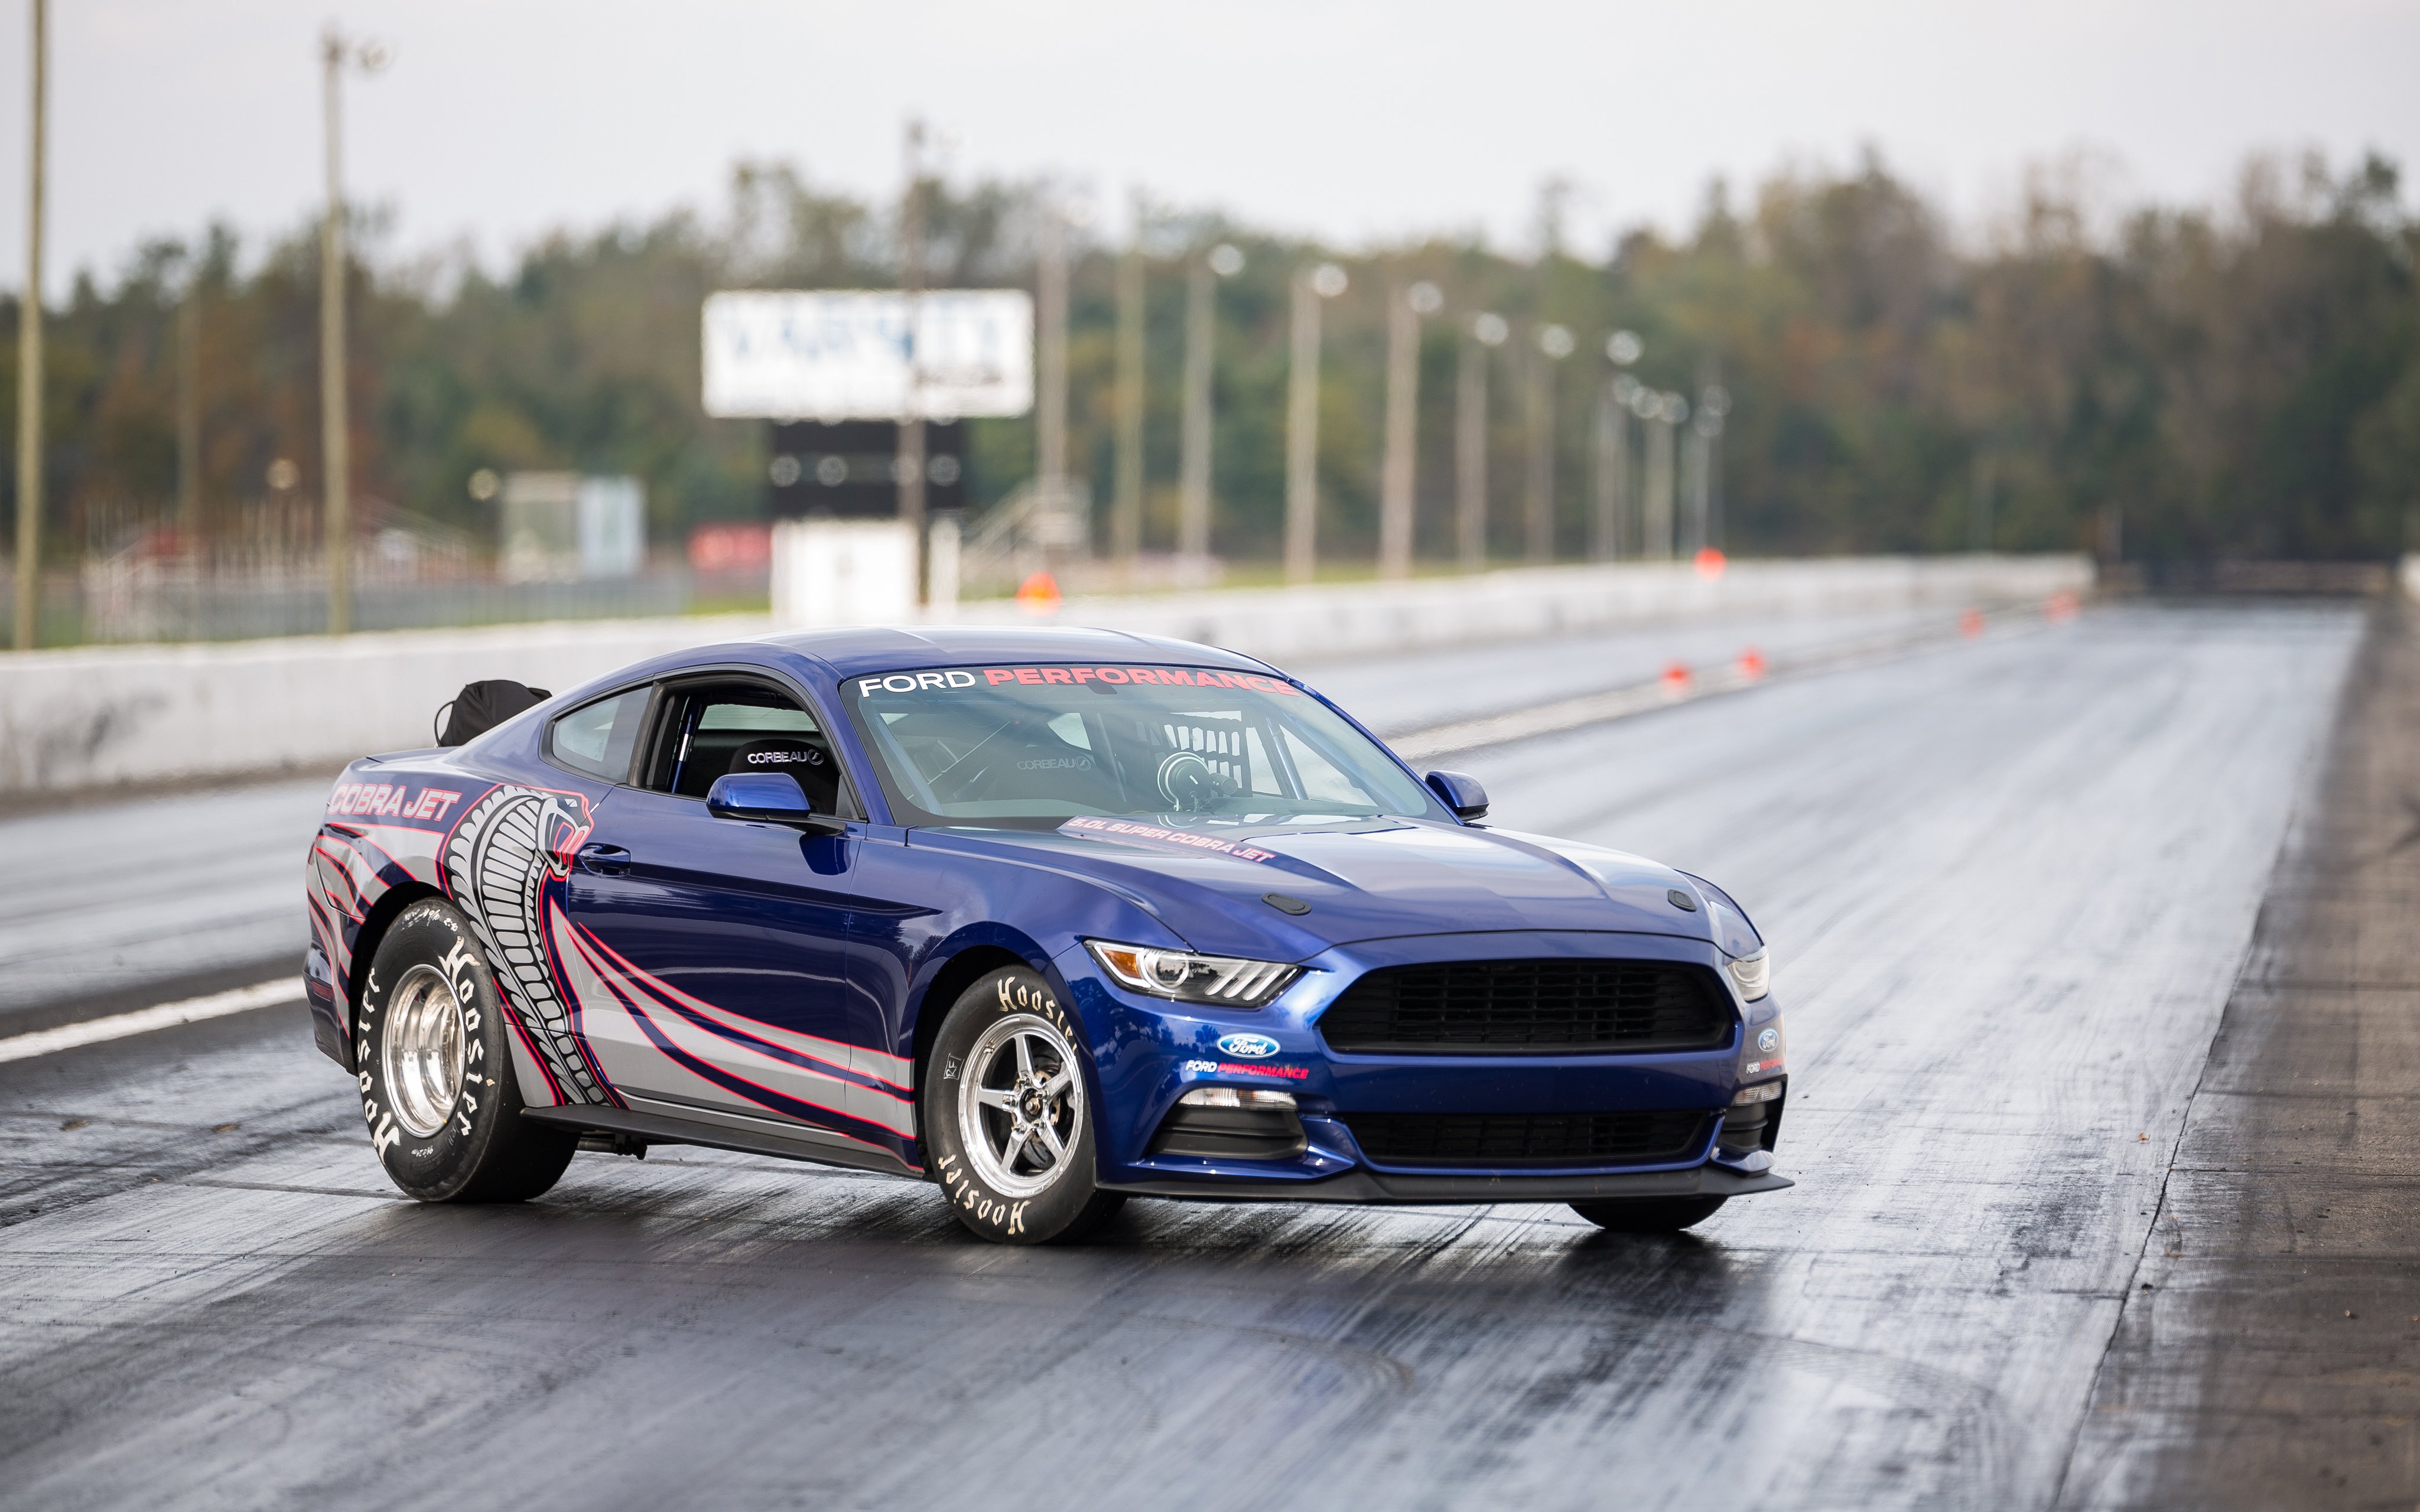 2016, Ford, Mustang, Cobra, Jet, Drag, Racing, Race, Muscle, Hot, Rod, Rods Wallpaper